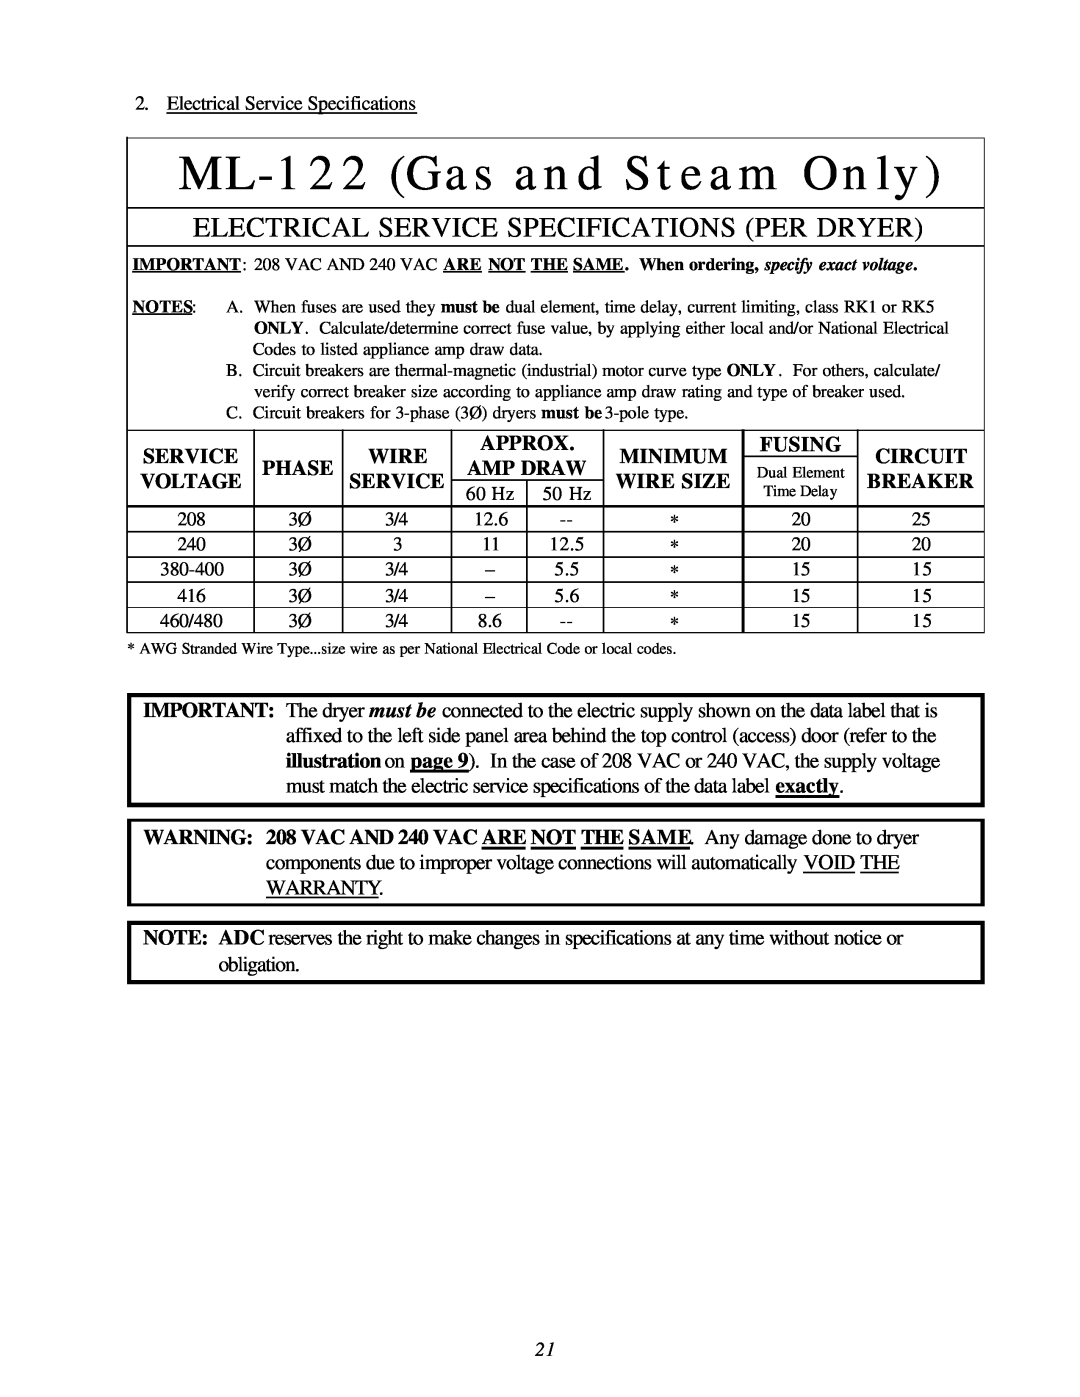 American Dryer Corp ML-122D Electrical Service Specifications Per Dryer, ML-122 Gas and Steam Only, Wire, Approx, Minimum 